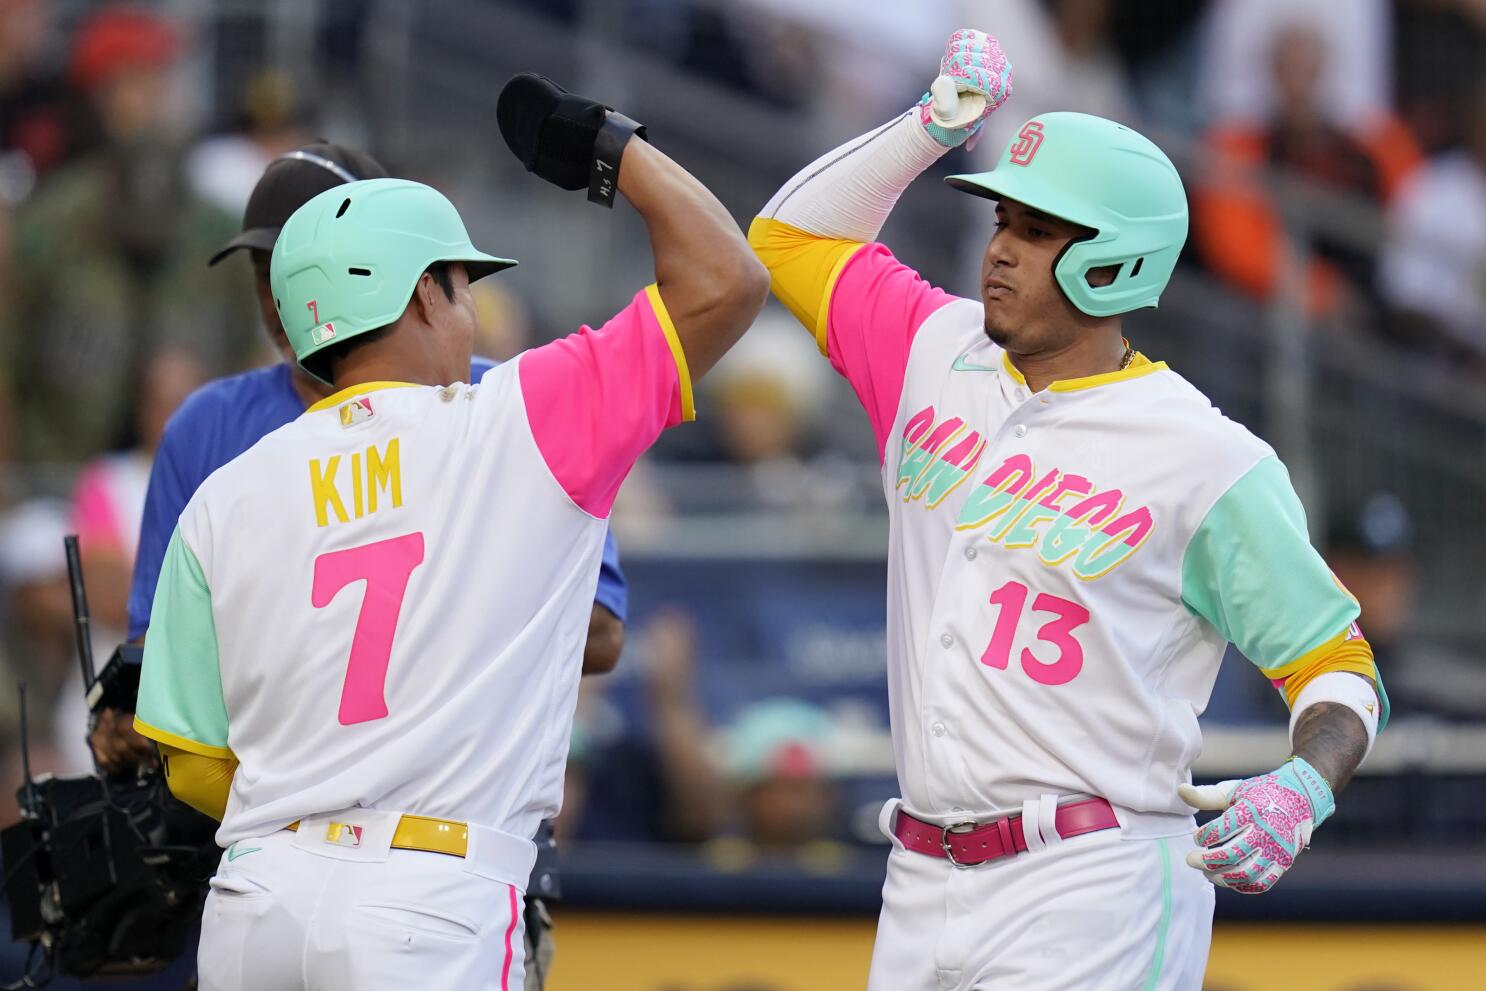 Get your pink and mint fits on, it's - San Diego Padres